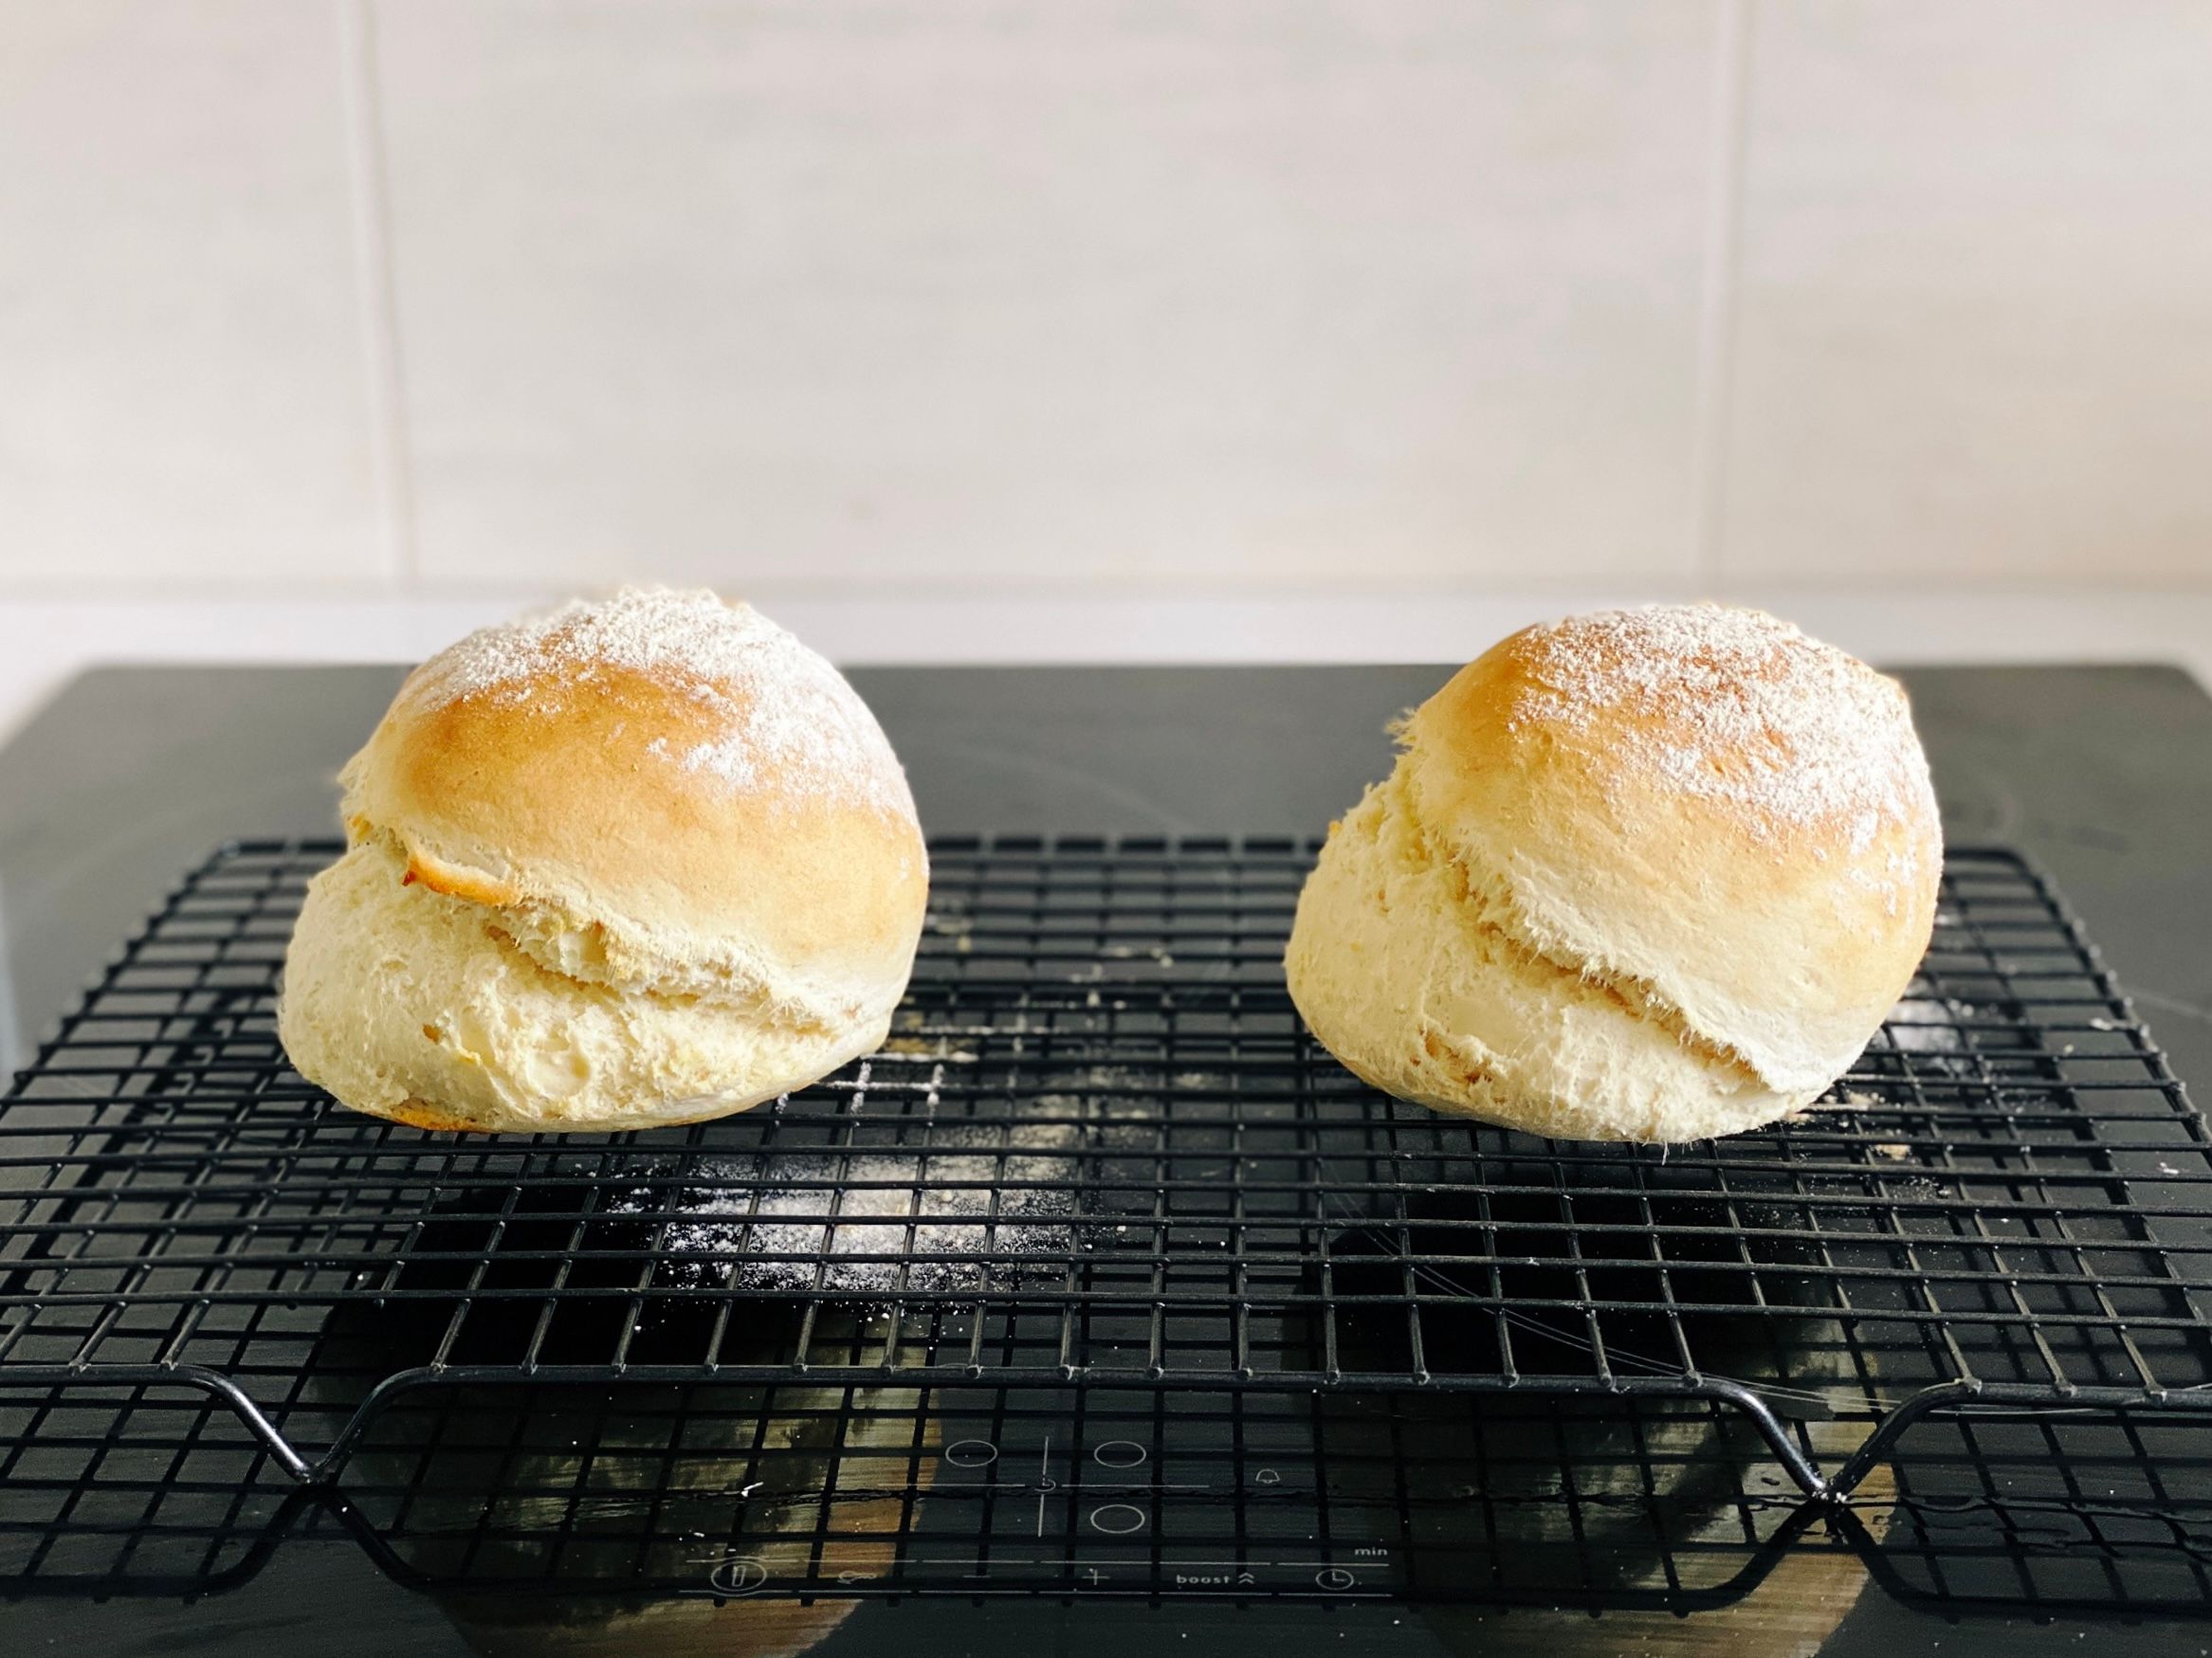 A photo of two pieces of damper (essentially very basic bread), with flour on top. They've split weirdly in the middle along the horizontal axis though, so it looks like the top half is slowly sliding off the bottom.